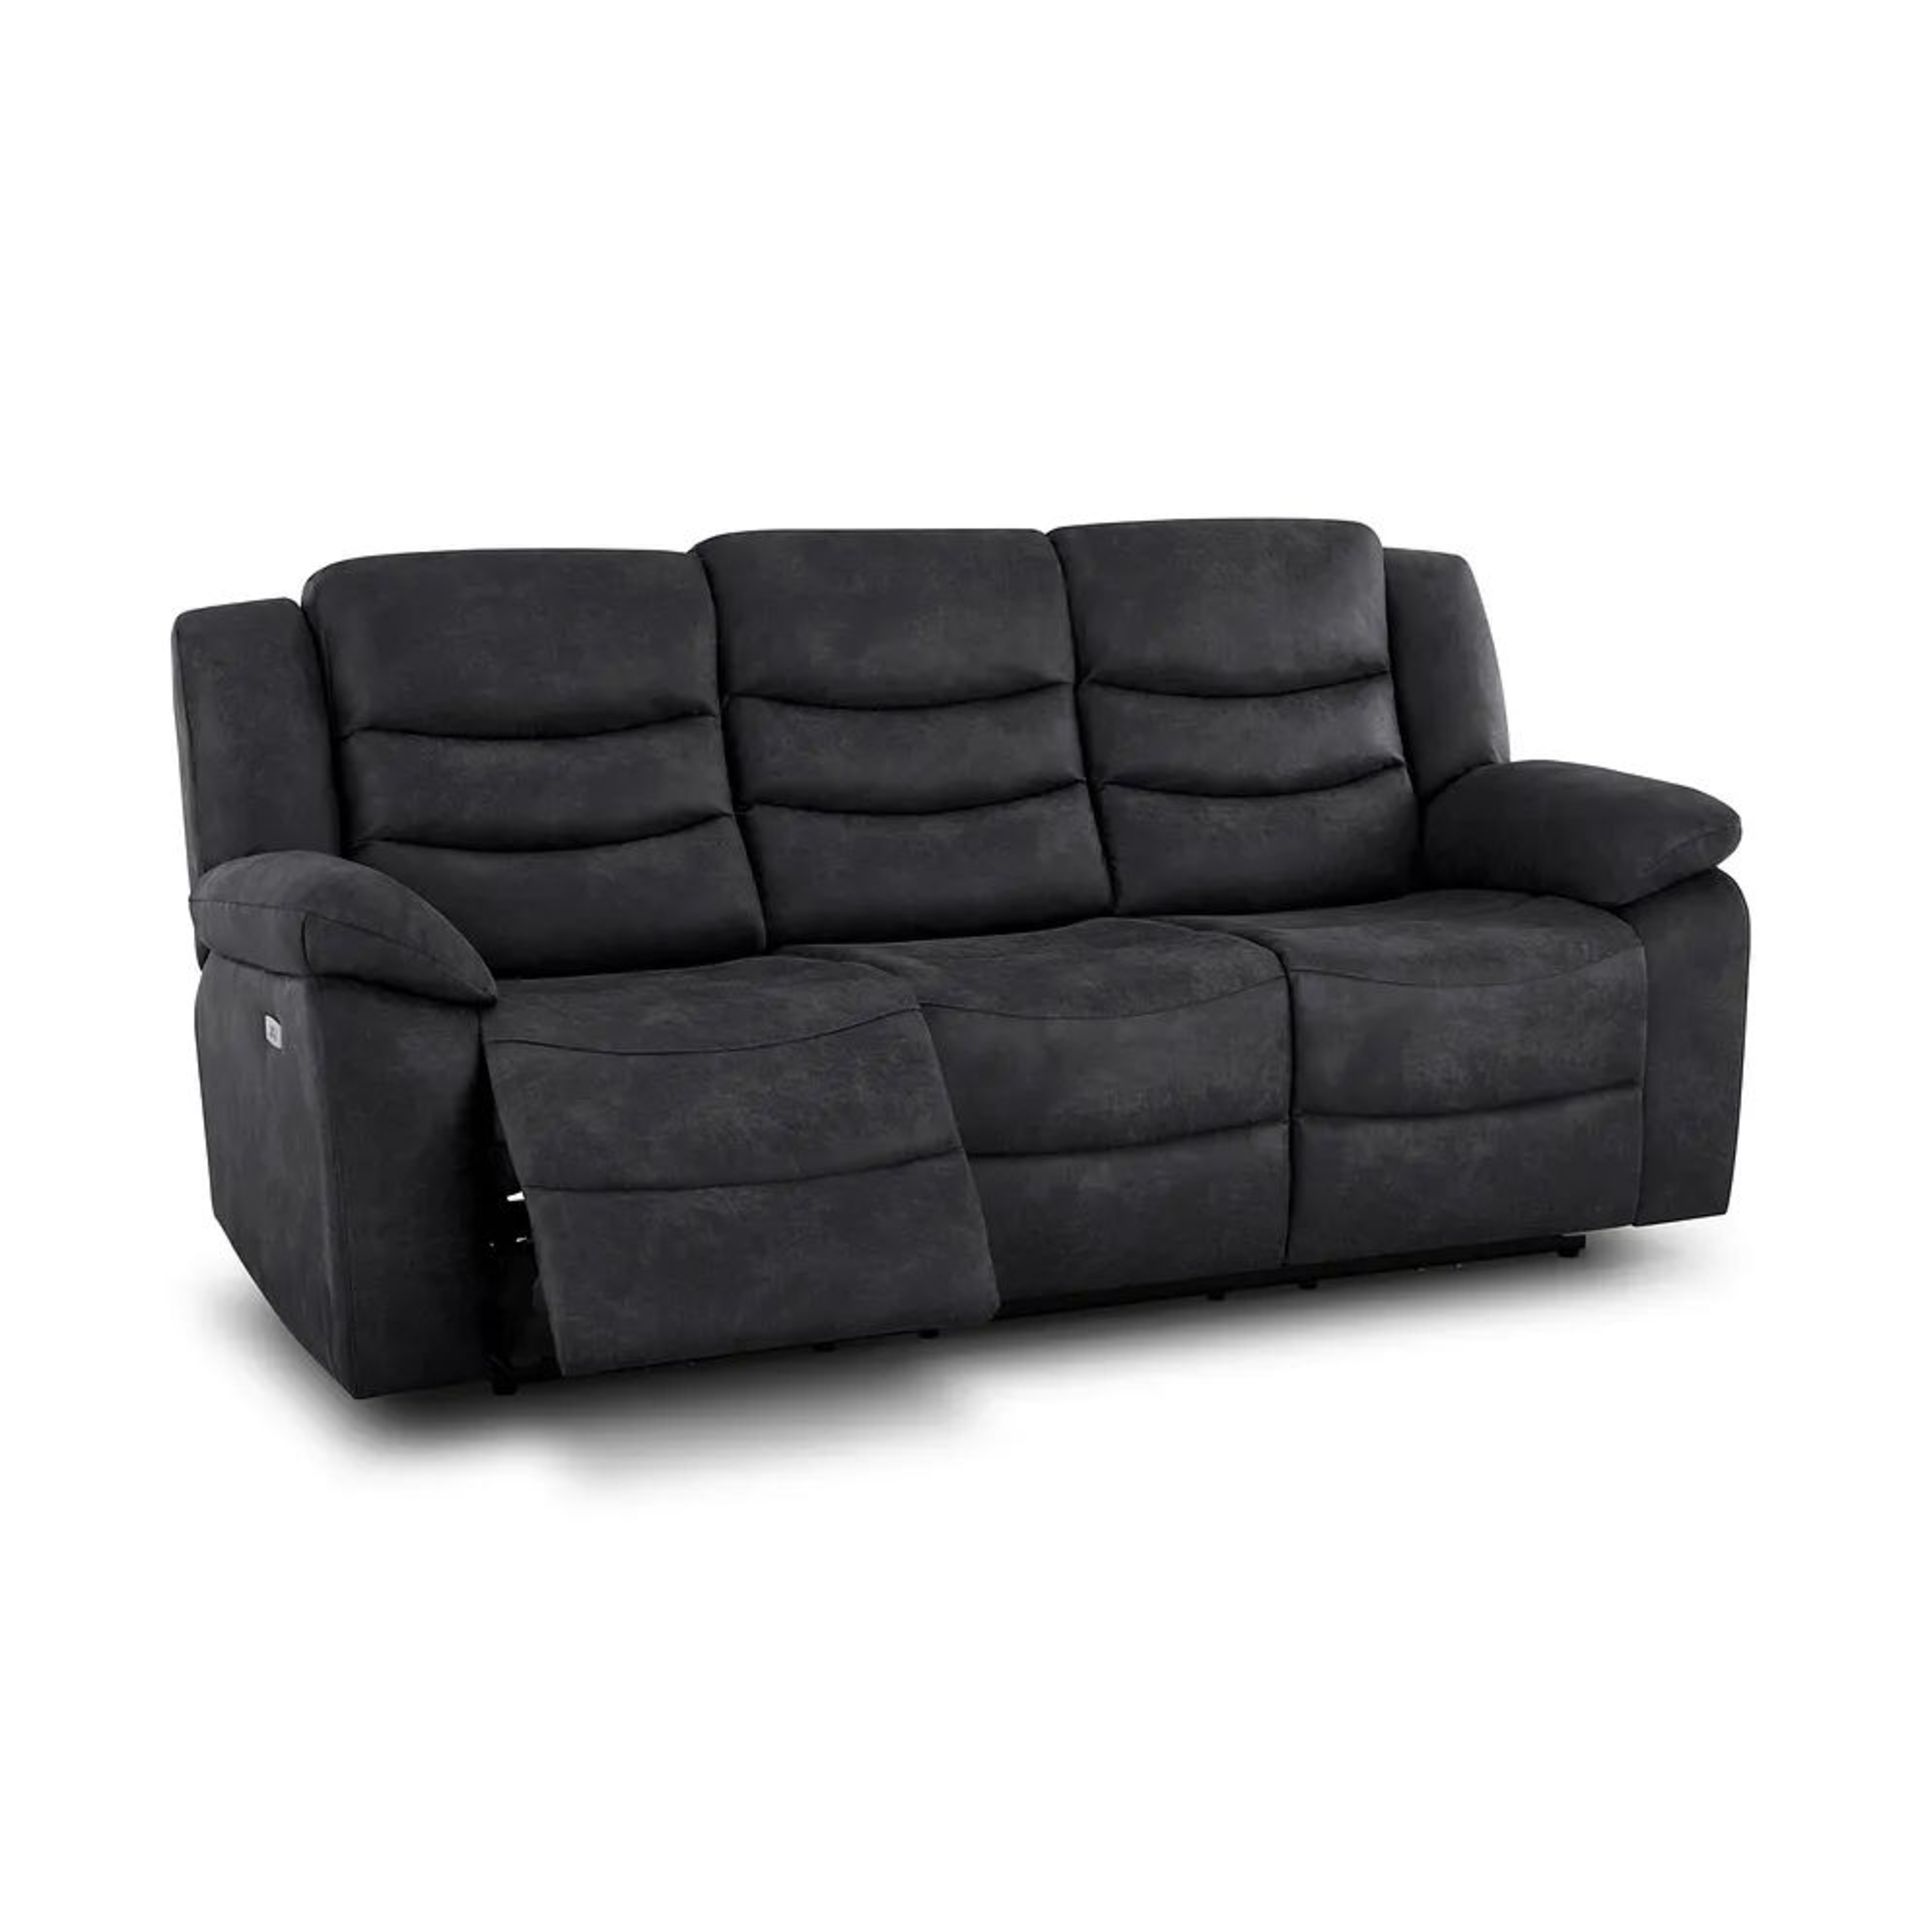 BRAND NEW MARLOW 3 Seater Electric Recliner Sofa - MILLER GREY FABRIC. RRP £1199. Designed to suit - Image 3 of 12